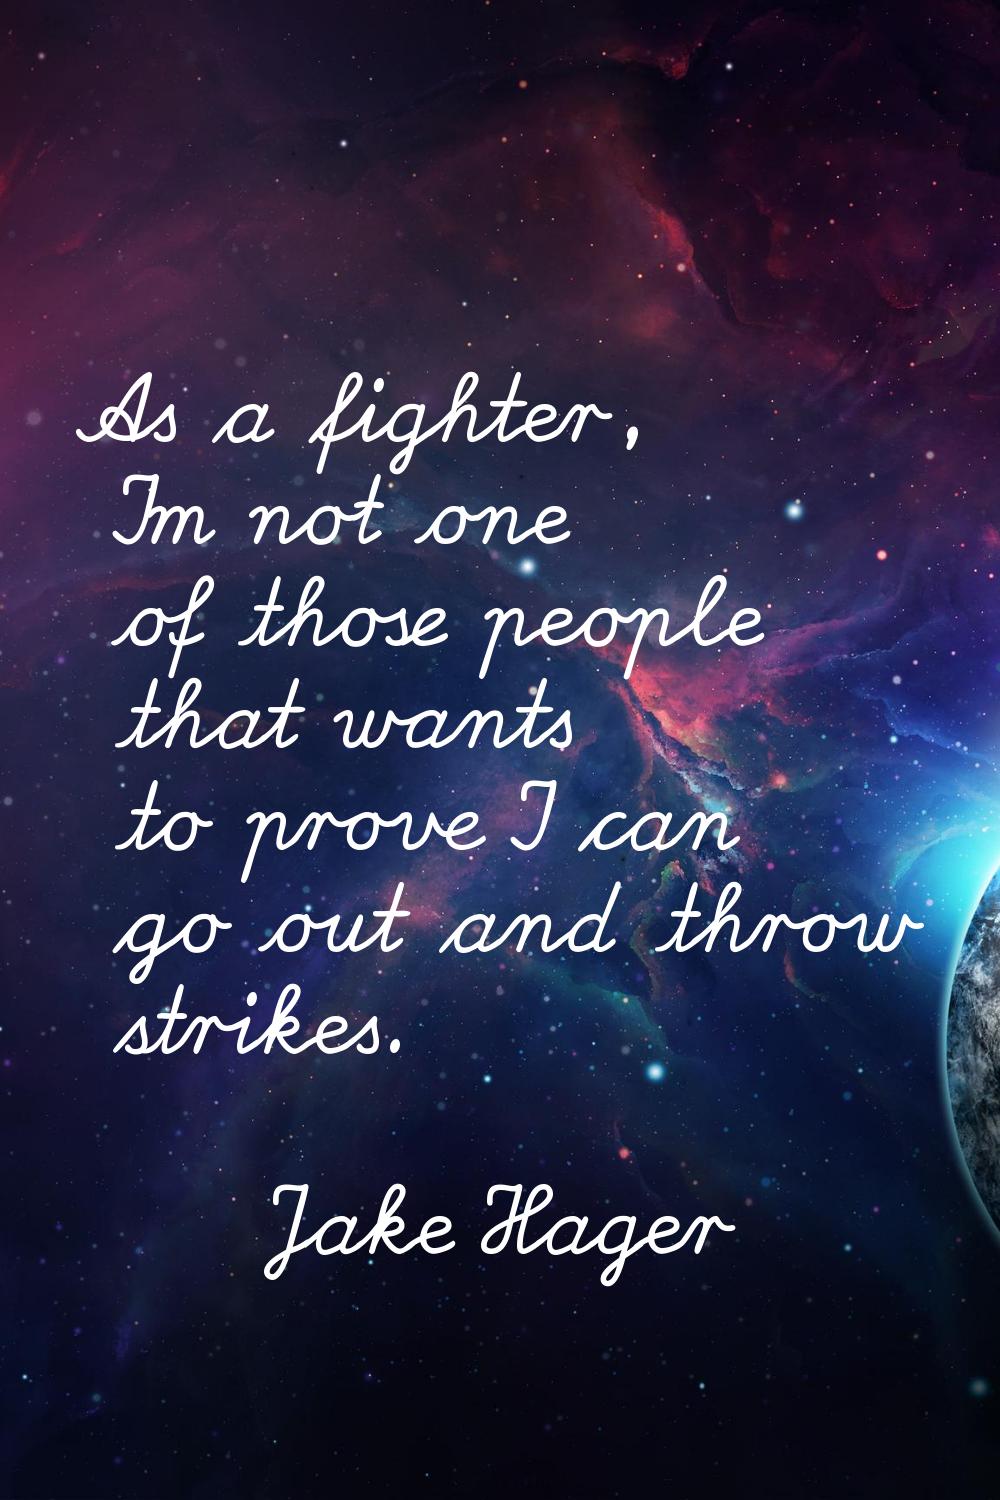 As a fighter, I'm not one of those people that wants to prove I can go out and throw strikes.